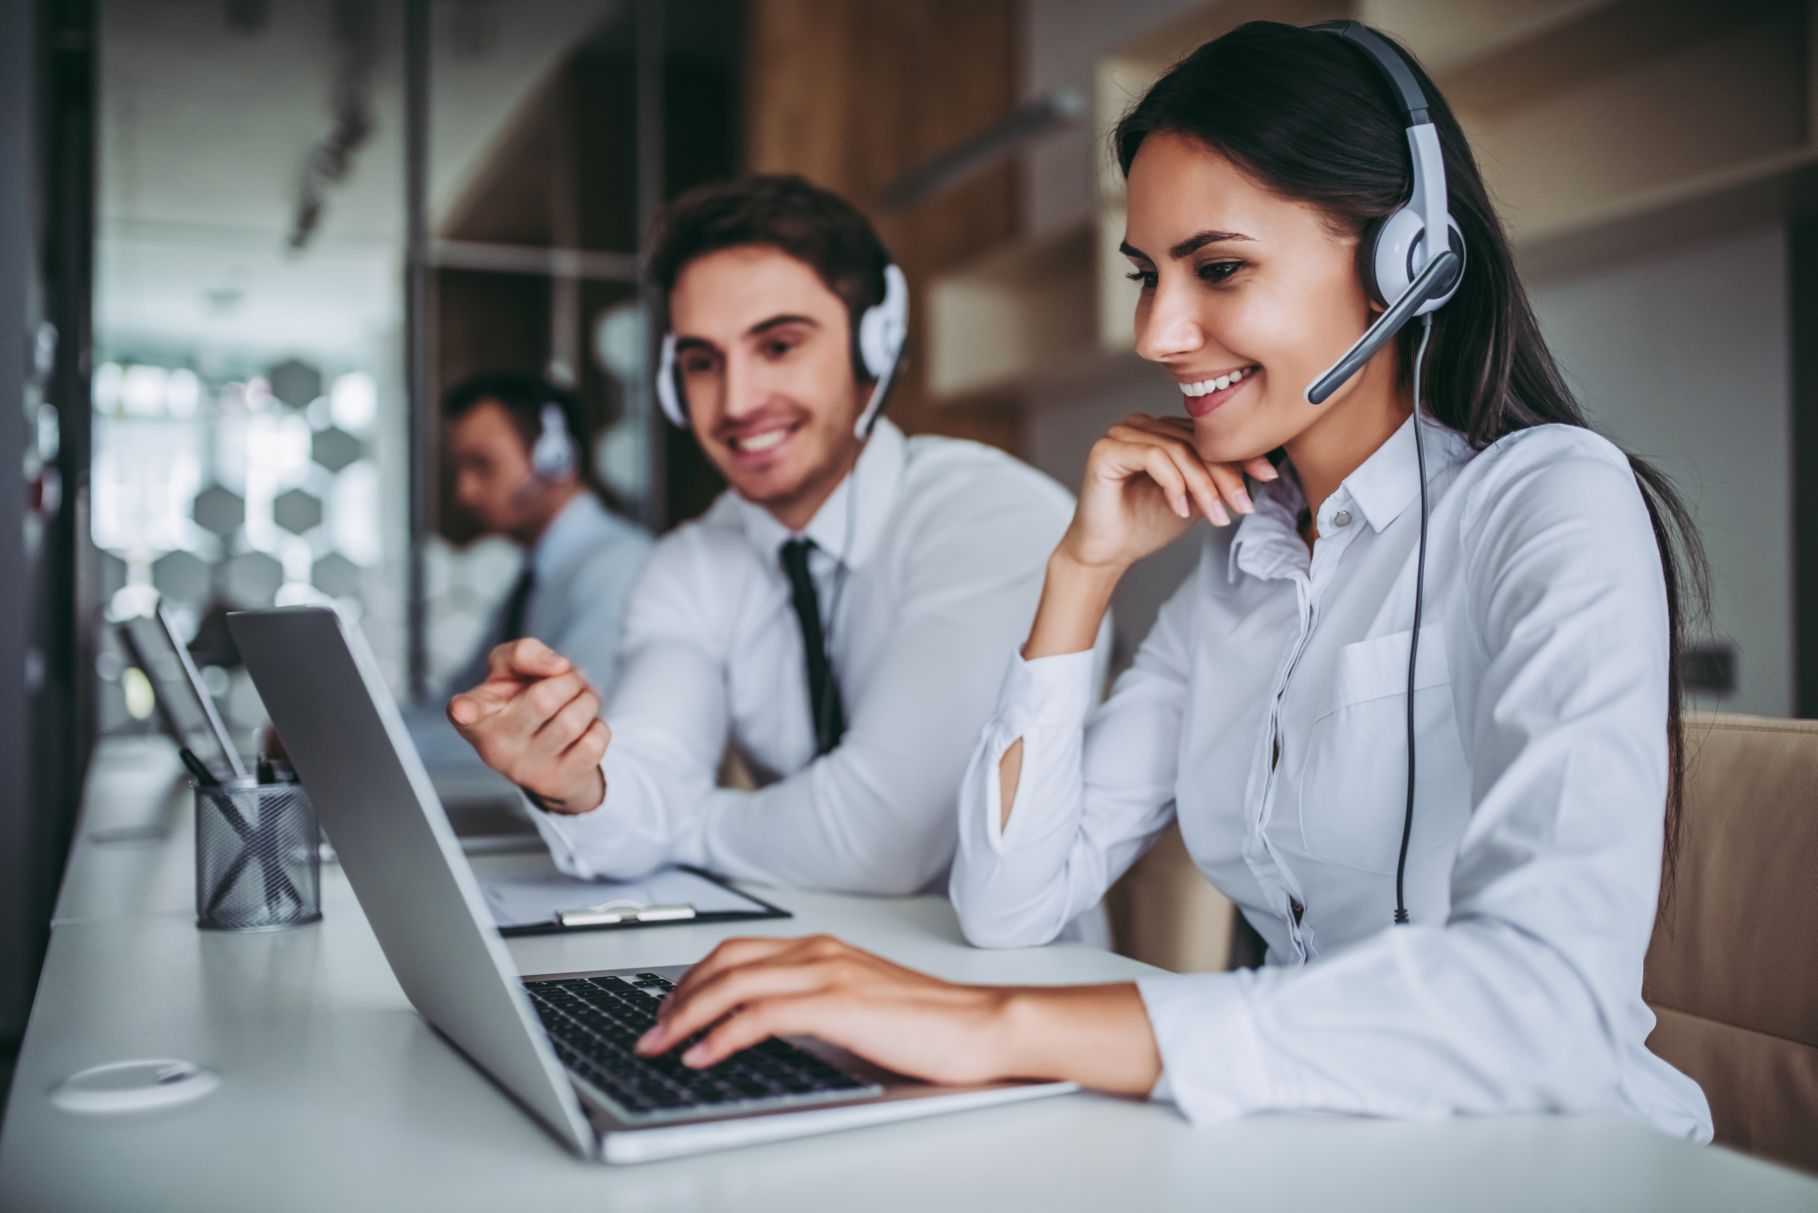 Contact center agents smiling and talking on the phone with headsets